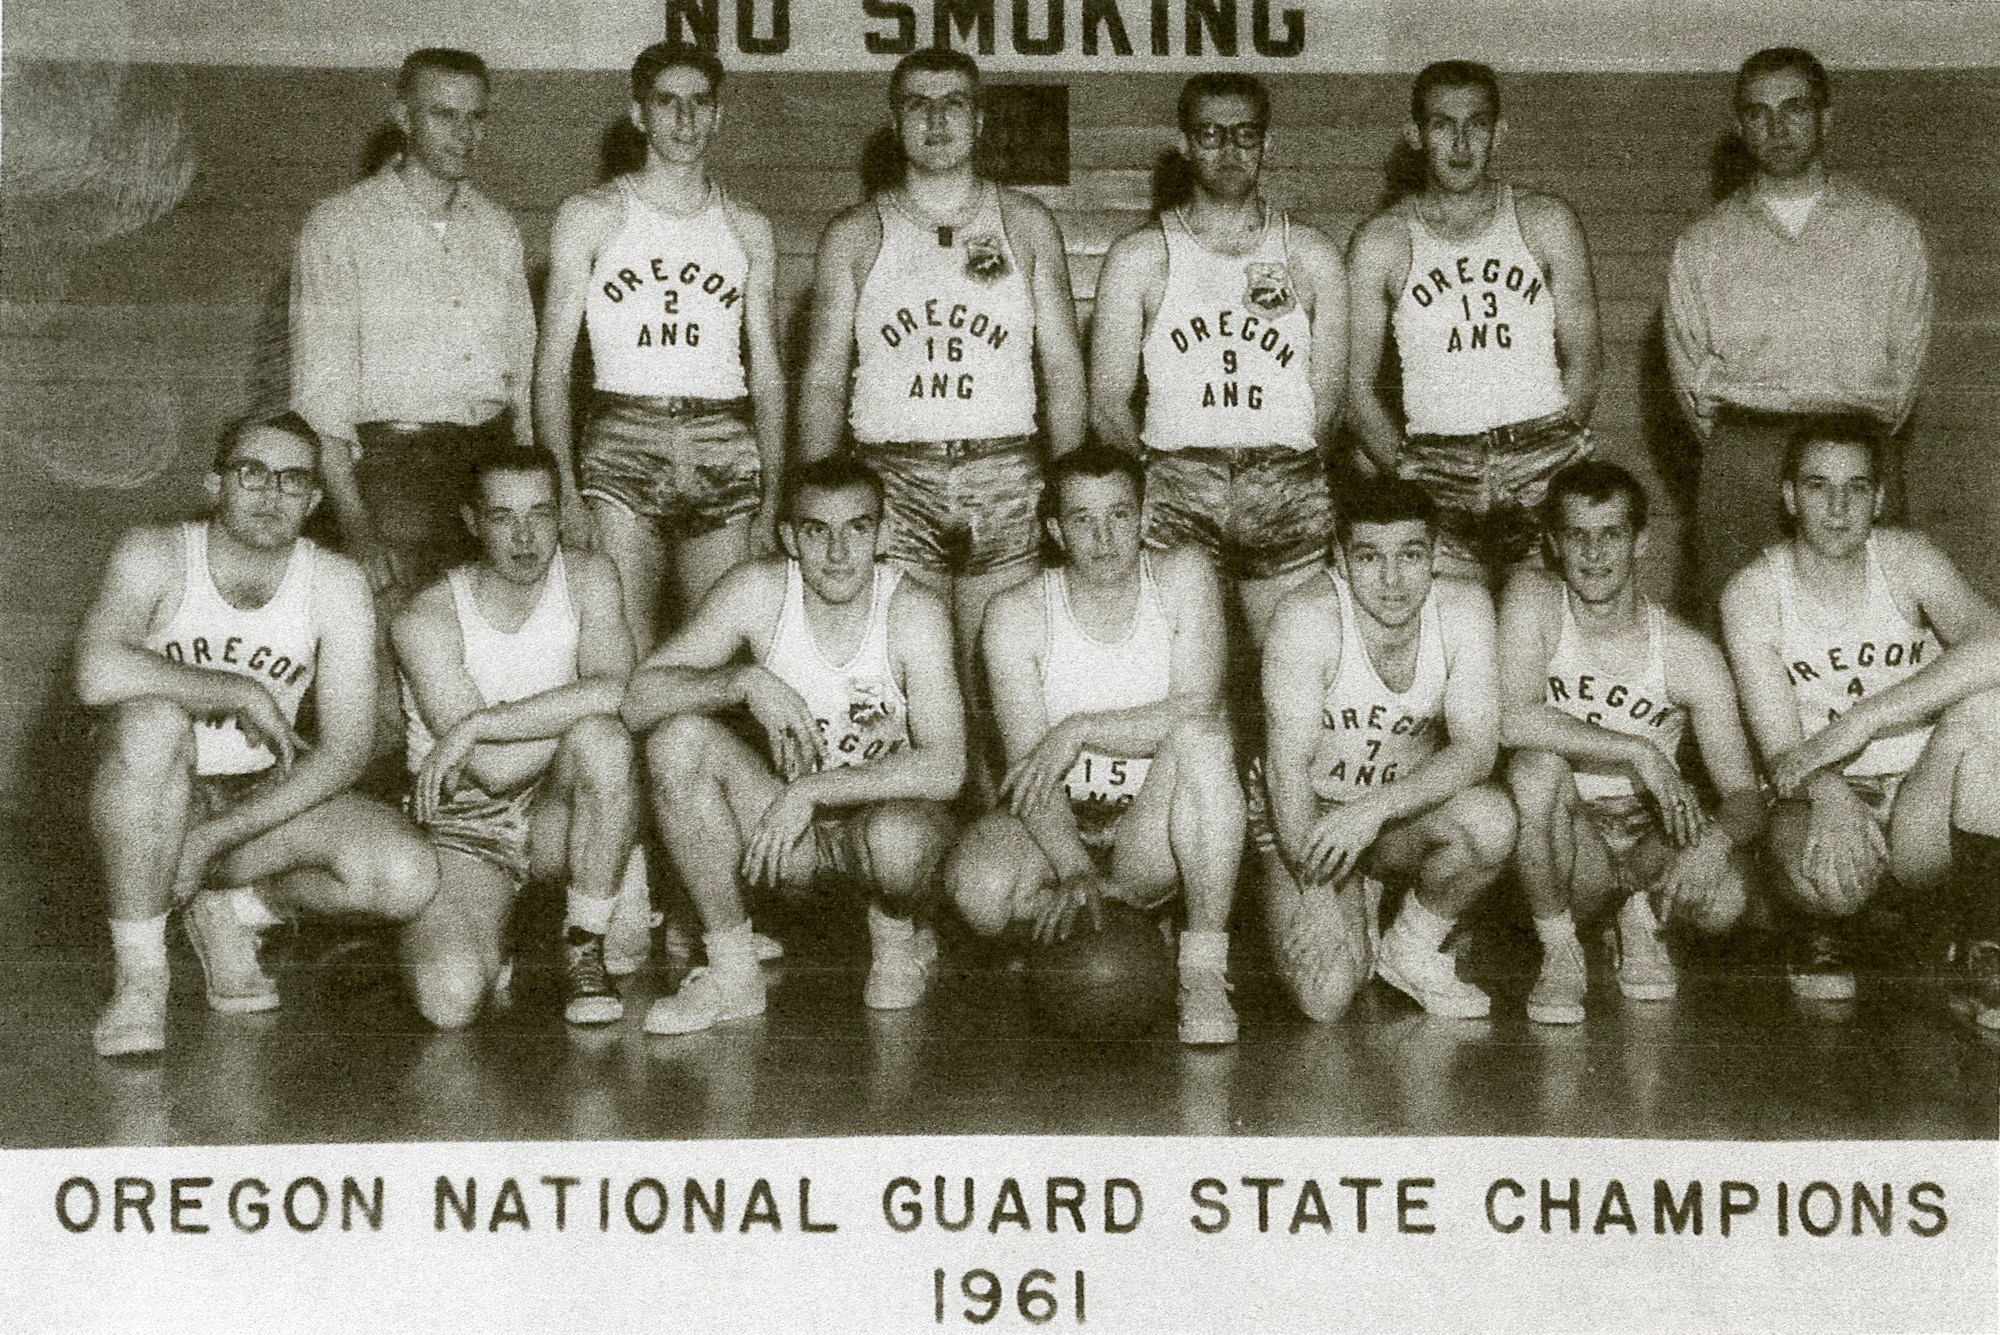 Members of the 1961 Oregon Air National Guard Championship Team. (photo from the 142nd Fighter Wing History Department)
